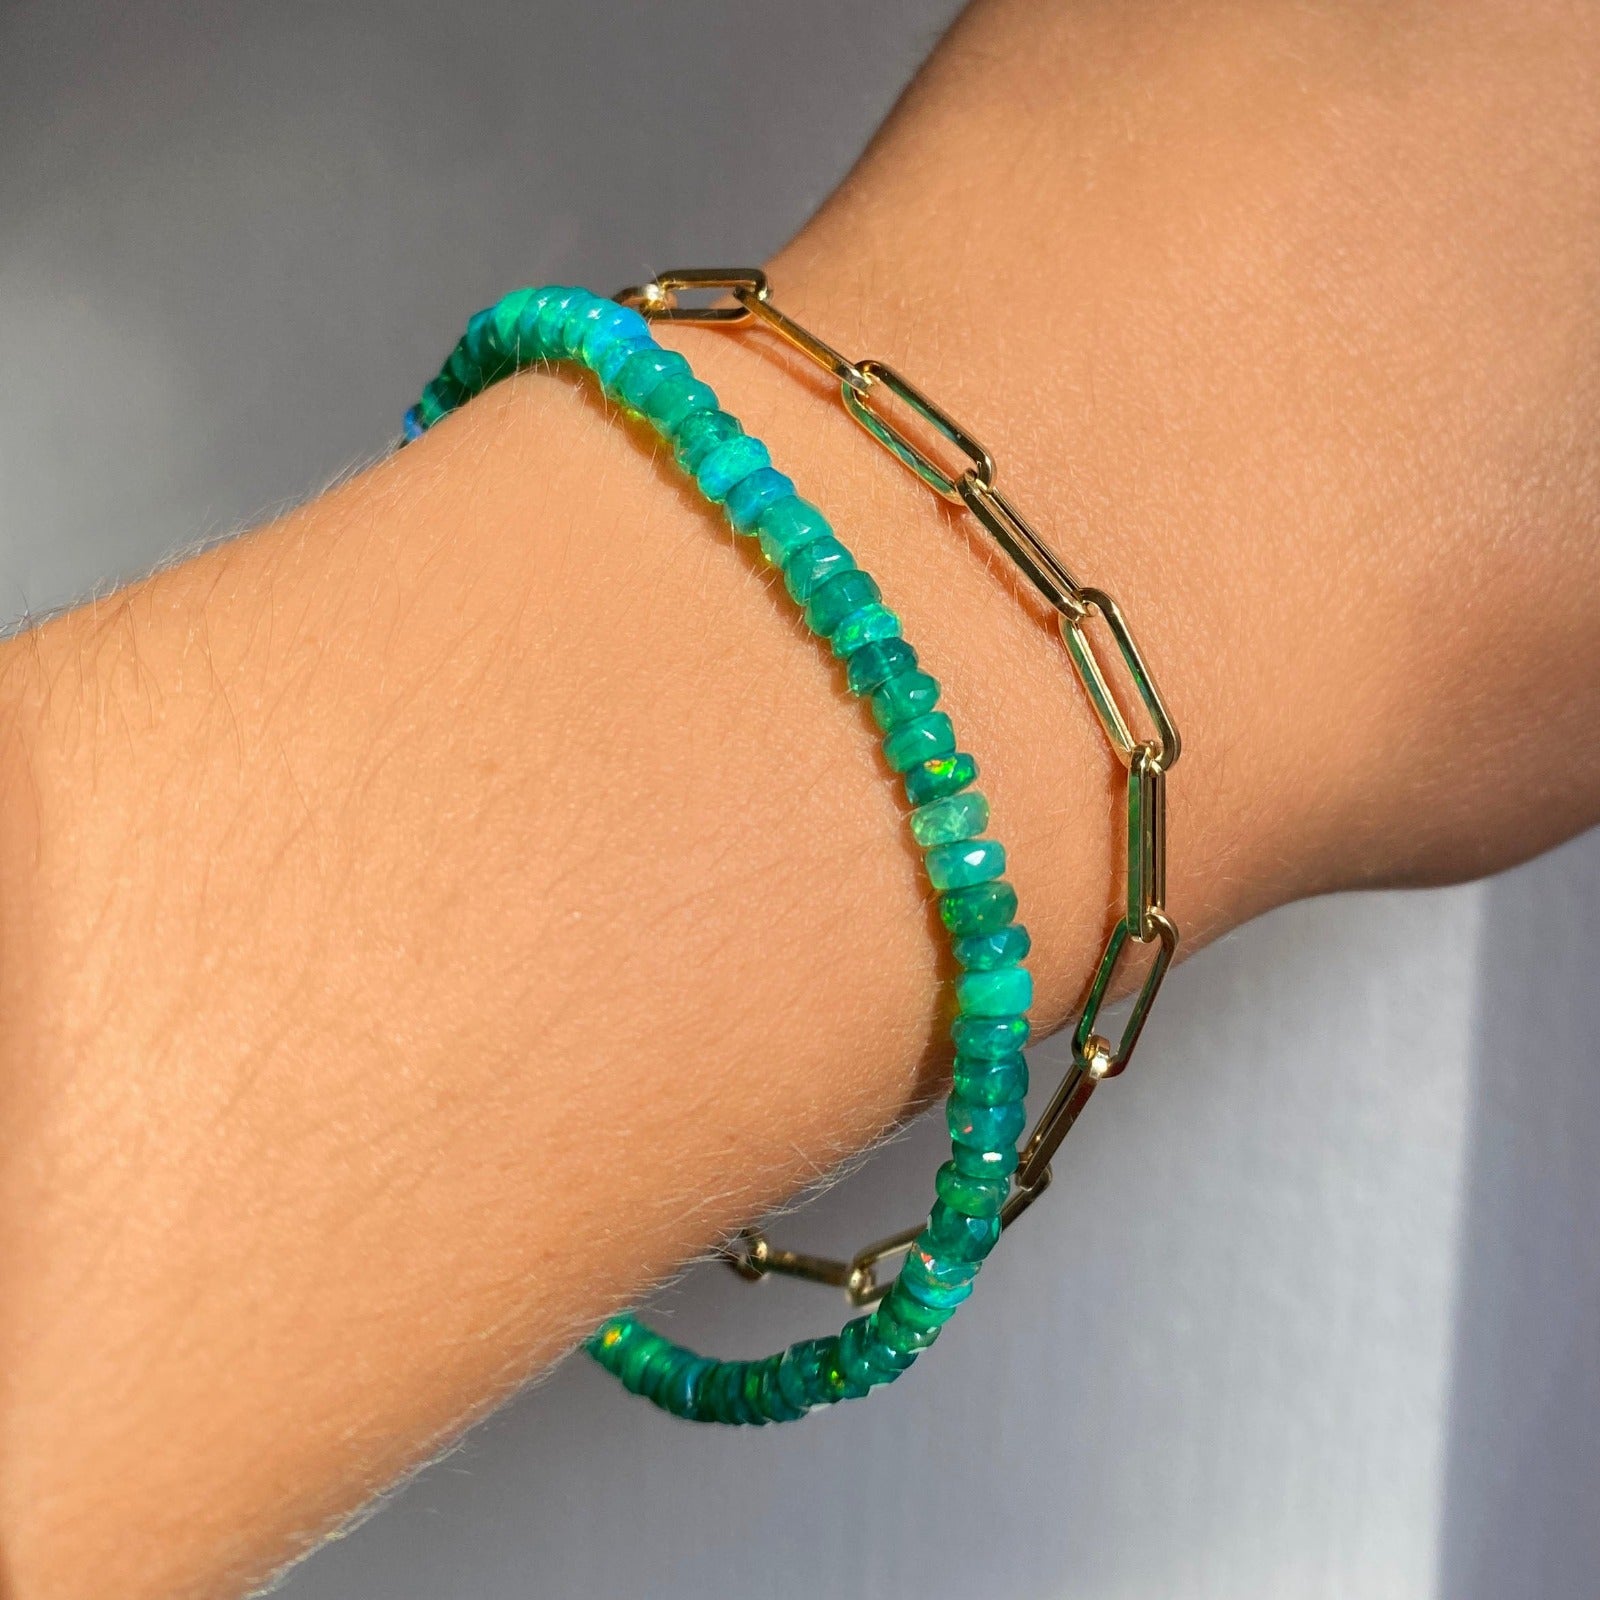 Shimmering beaded bracelet made of faceted opals in shades of green on a gold linking lobster clasp. Styled on a wrist layered with chunky paperclip chain bracelet.